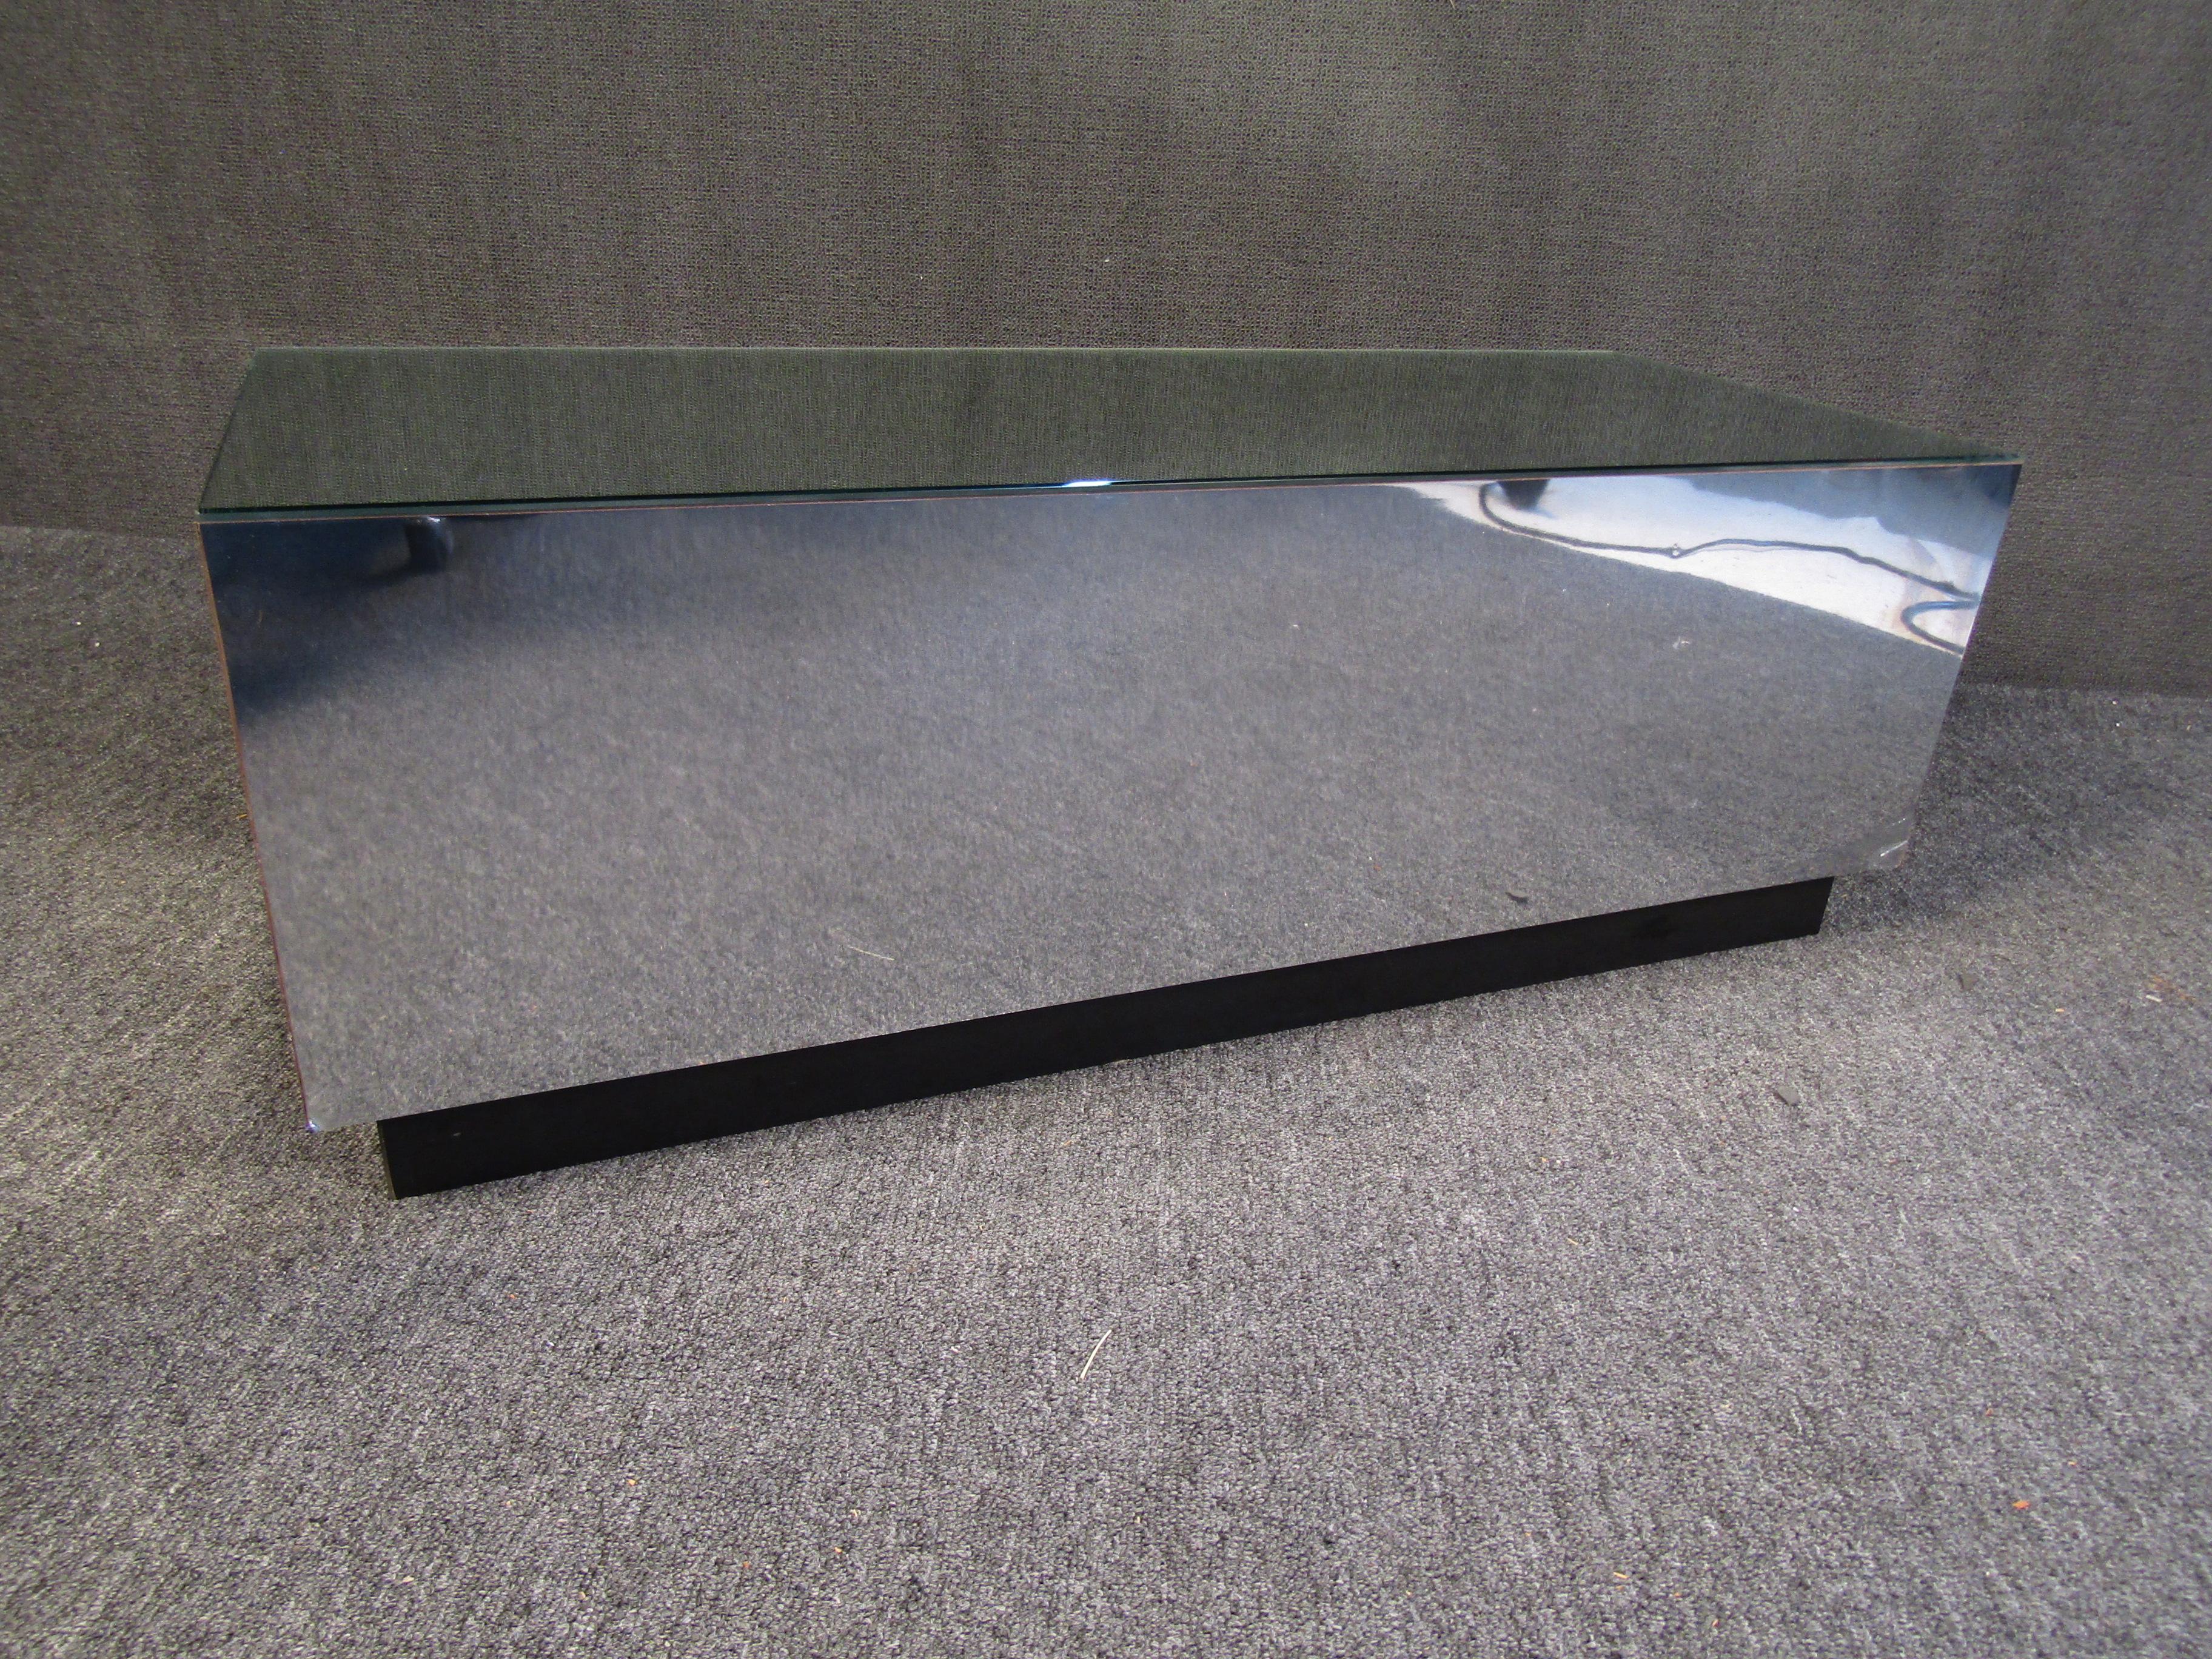 This interesting mirrored coffee table is sure to wow with its minimalist form and reflective surface. Please confirm item location with seller (NY/NJ).